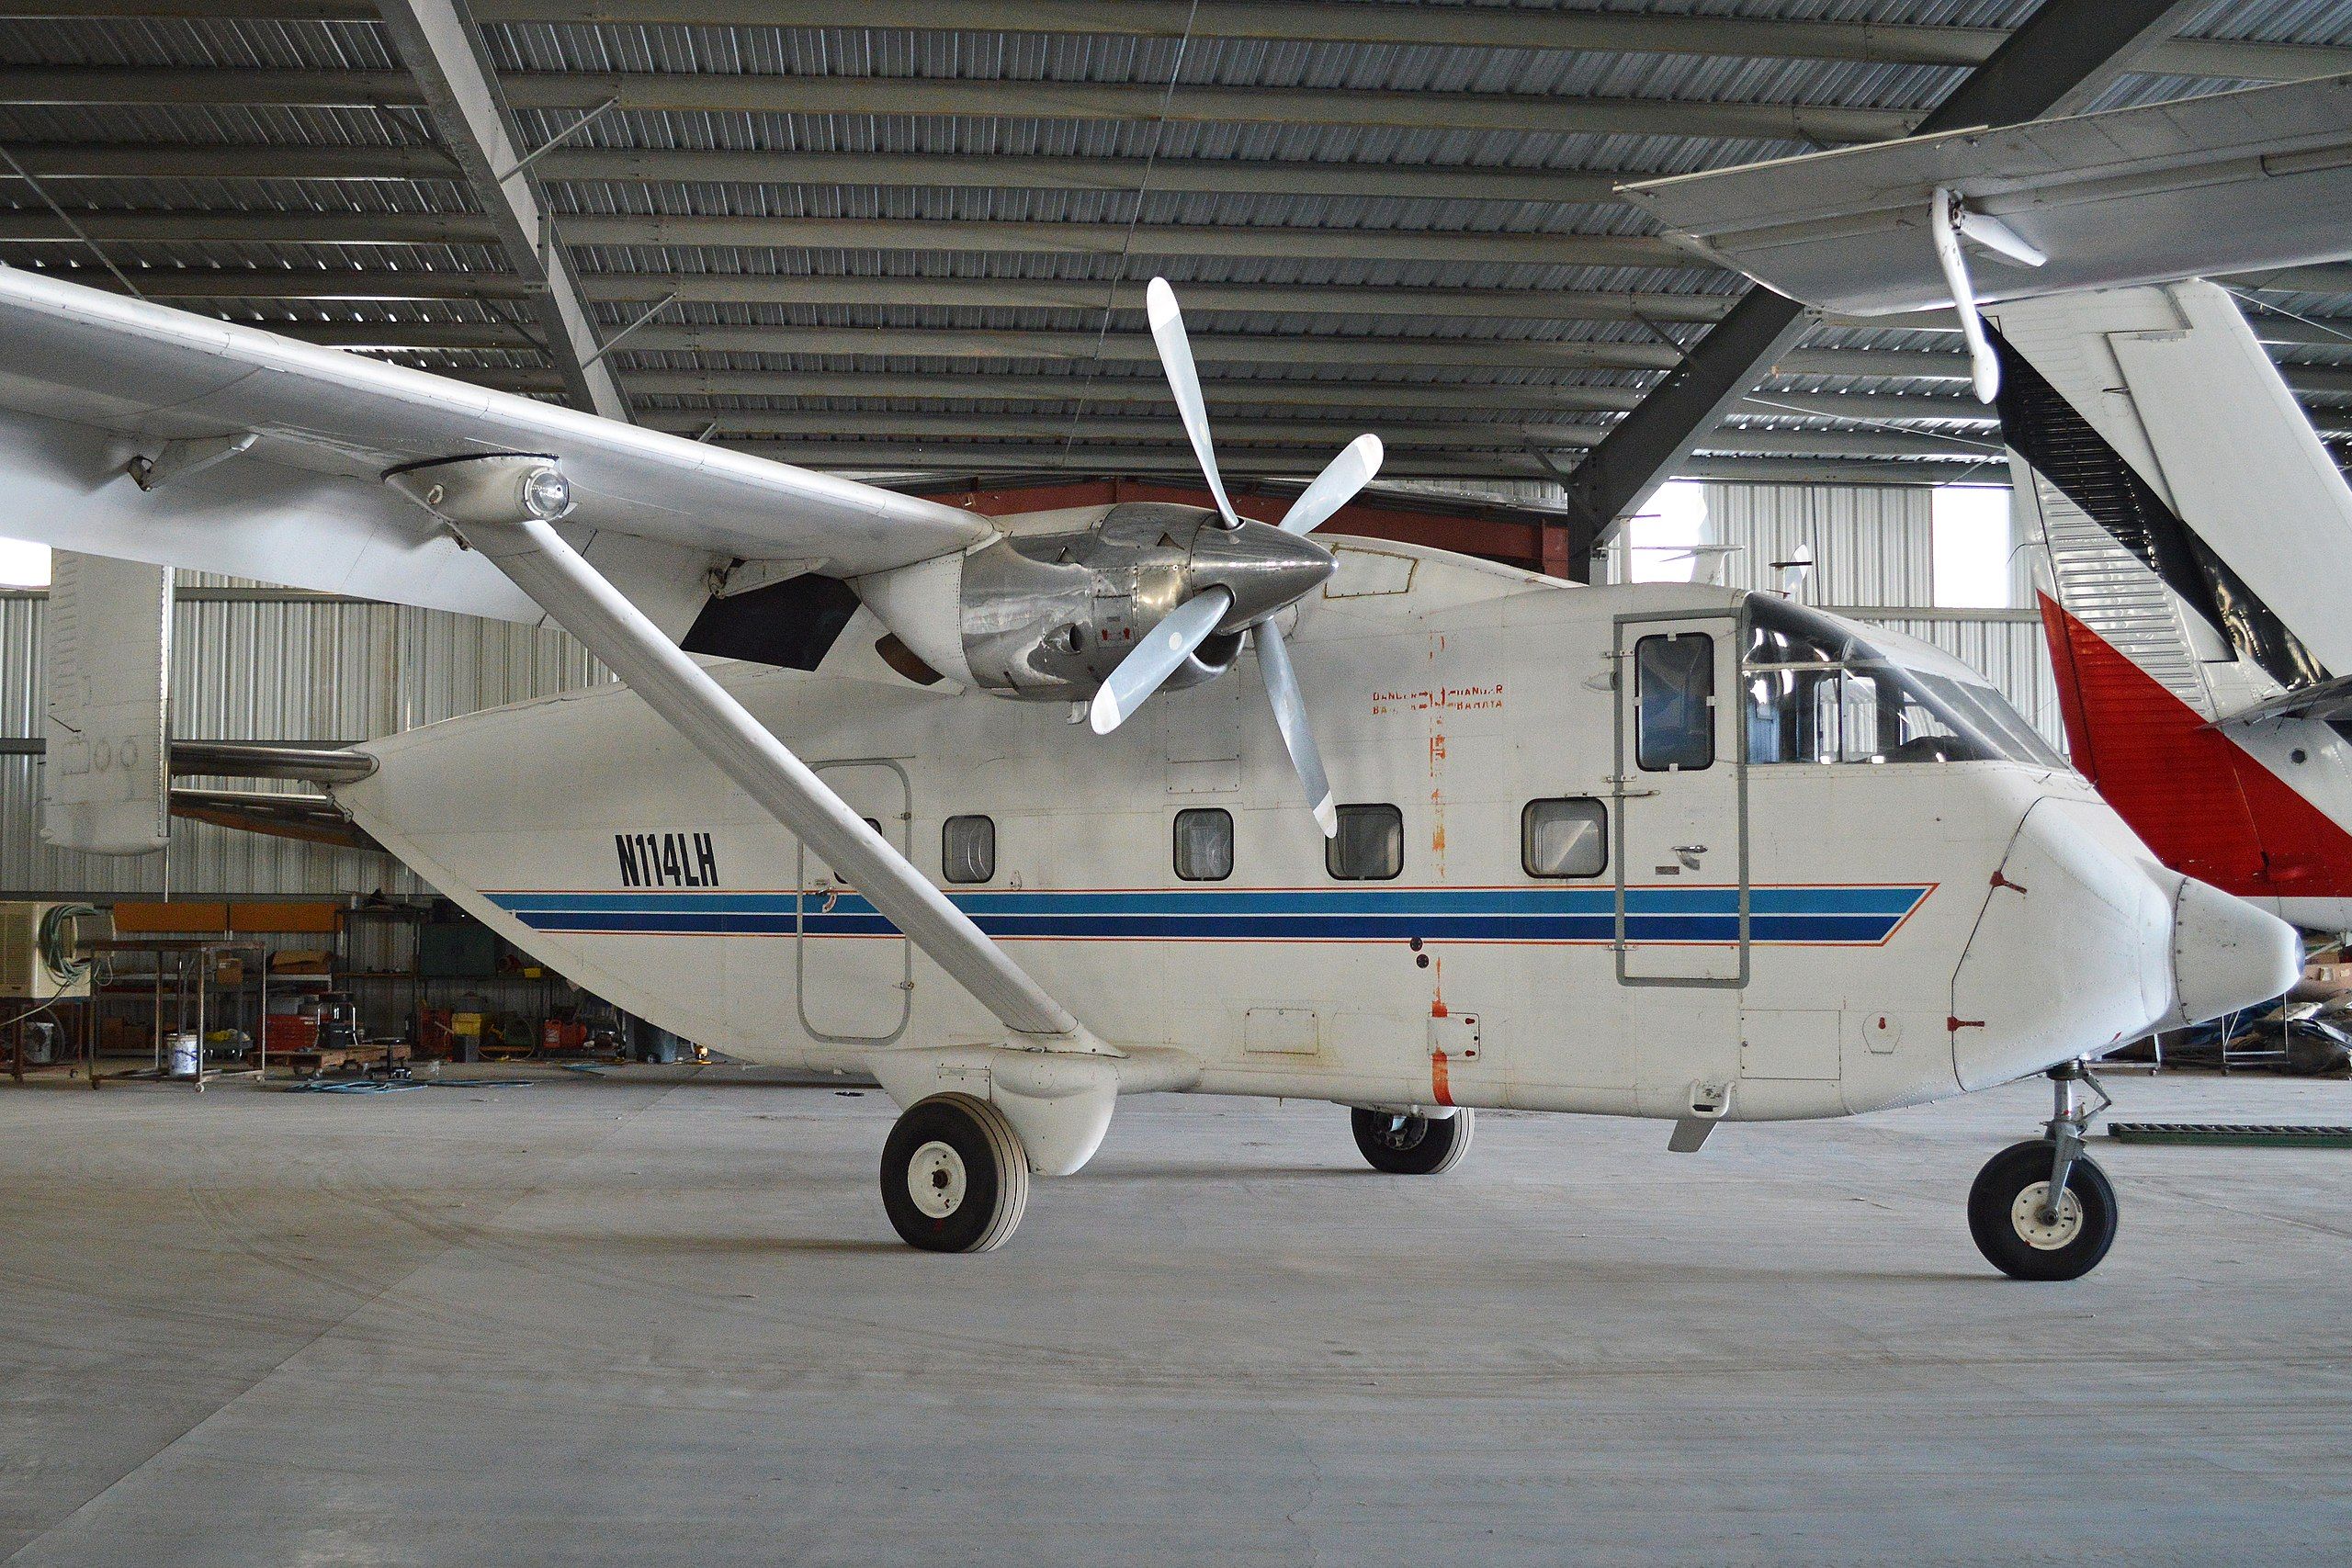 A white Short Skyvan with boxy fuselage and high-pointed wings parked in a hangar